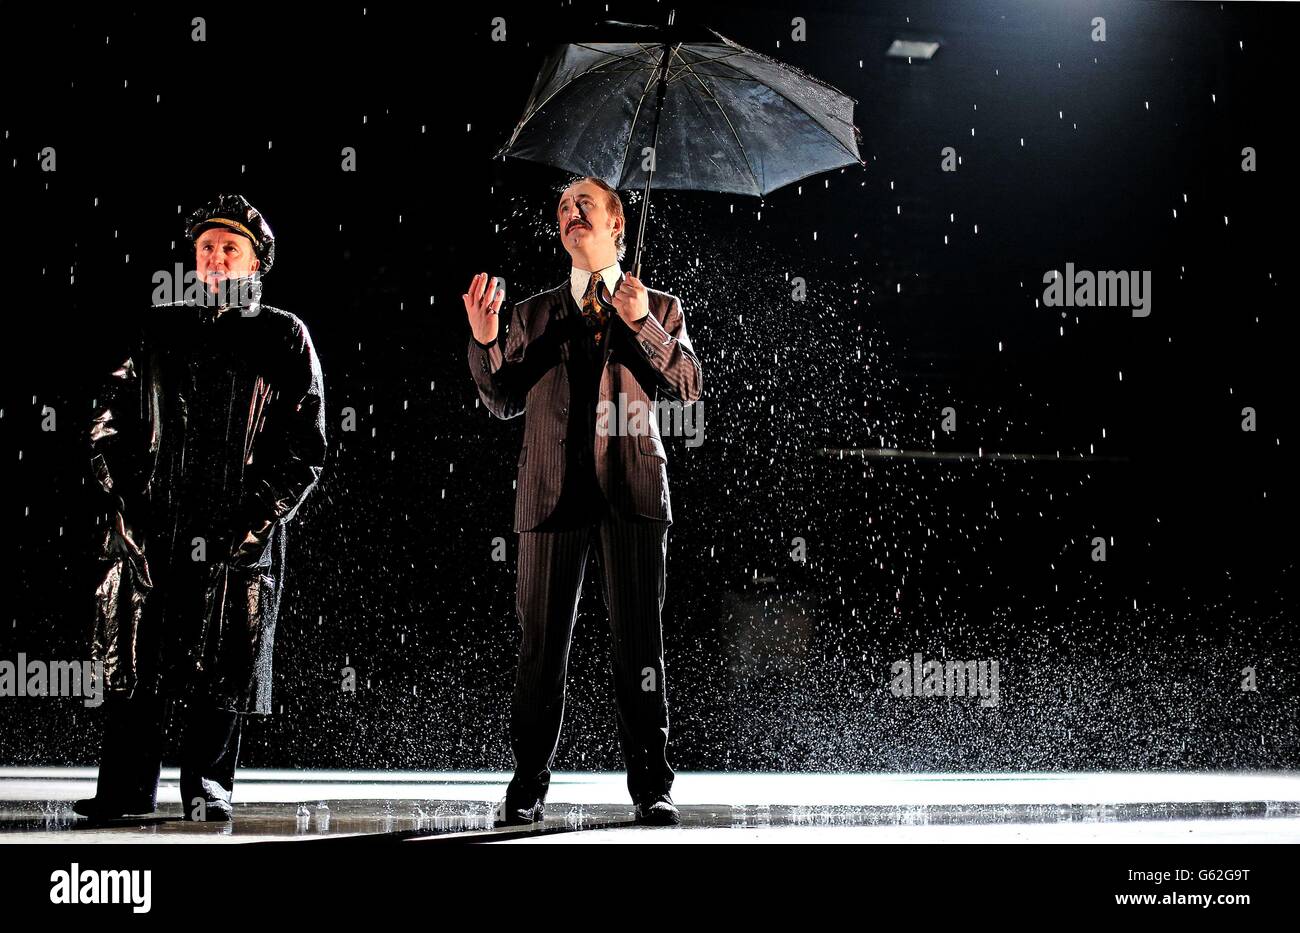 Actors Gary Lydon playing a New York Police Chief and Declan Conlon as the lead Gangster during a rain shower on stage at the Abbey Theatre in Dublin during rehearsals for Drum Belly, a new play by writer Richard Dormer which has it's world premiere tomorrow night. Stock Photo